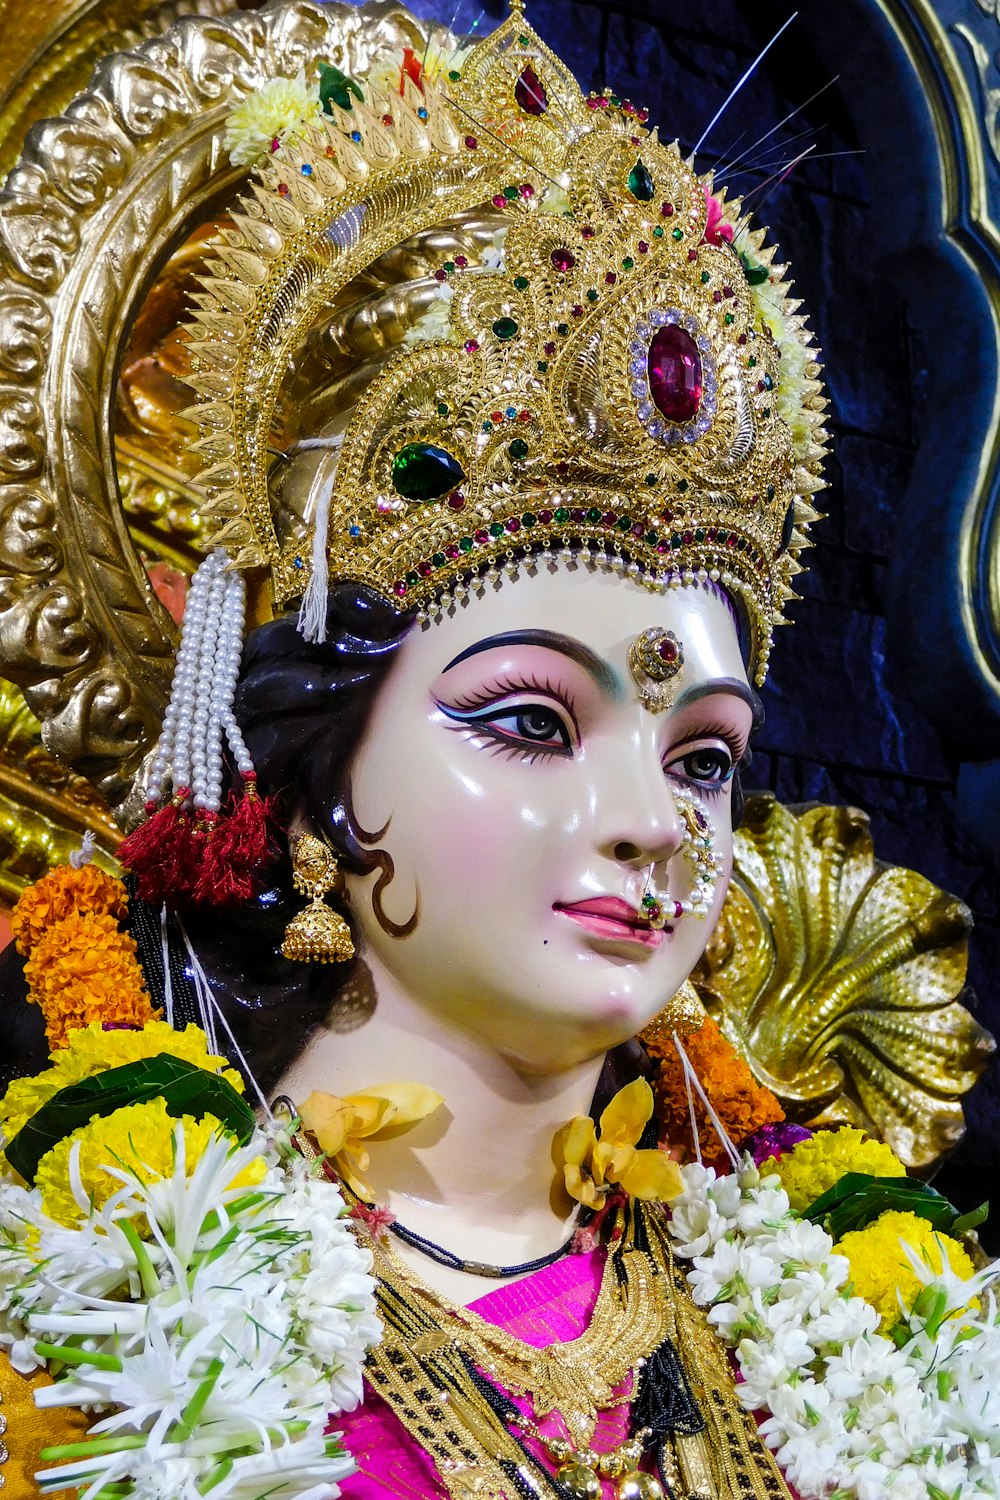 Maa Durga Pictures | Download Free Images on Unsplash